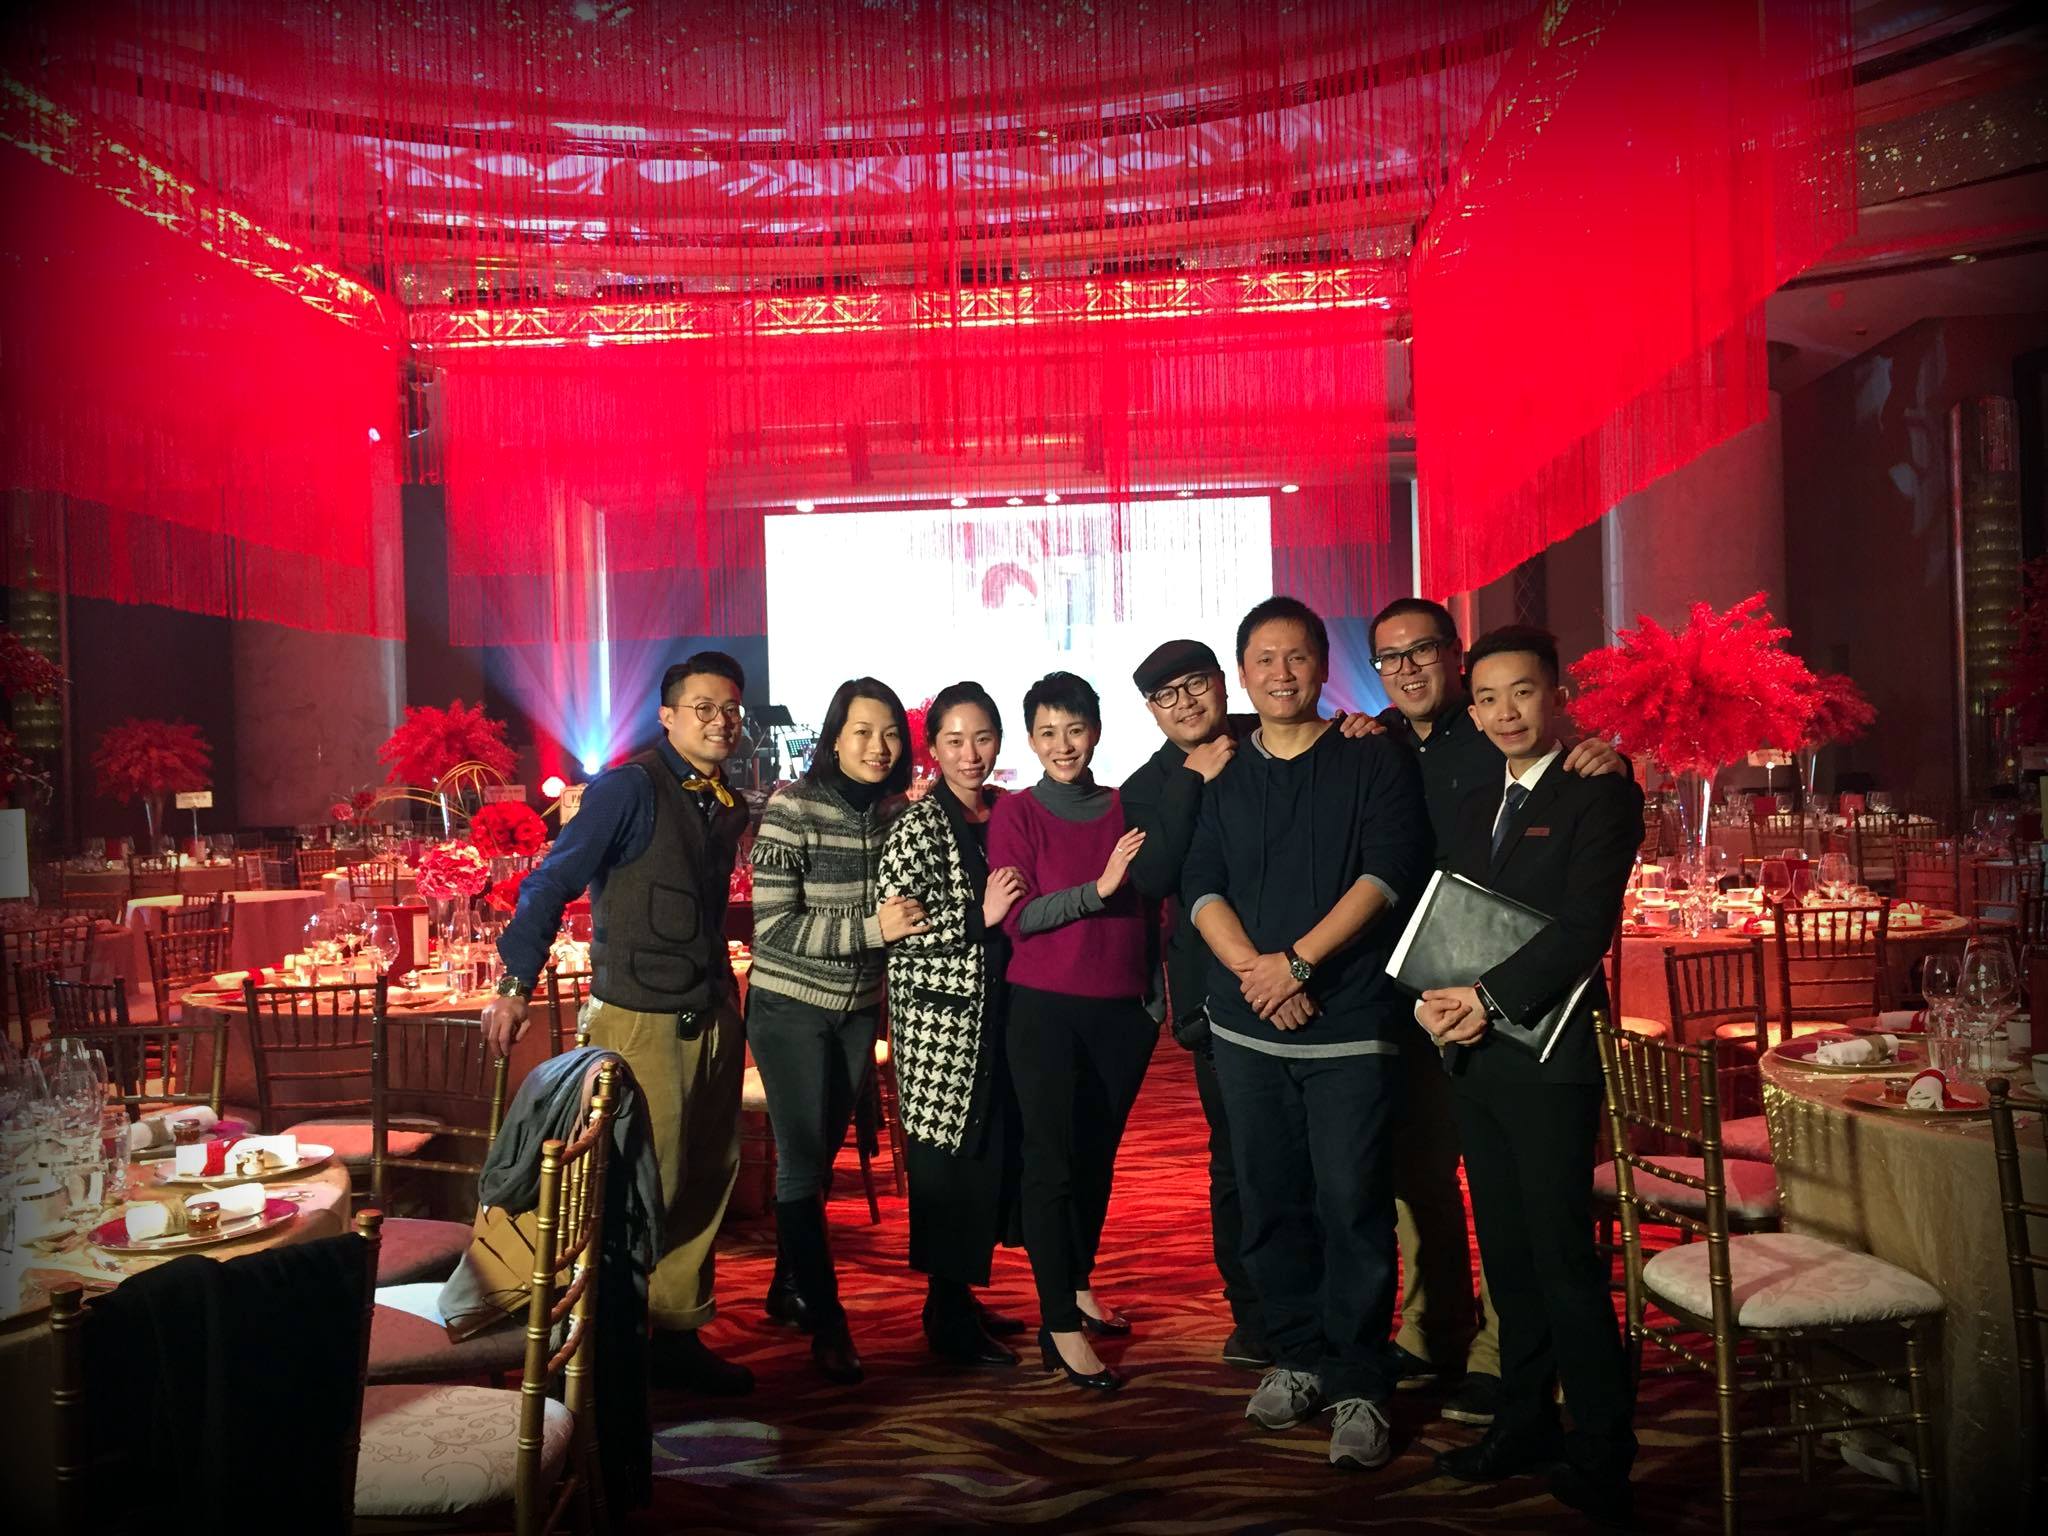 Unison Production Live Music band performance - Wedding ceremony and wedding banquet in Grand Hyatt Hotel, Jan2016